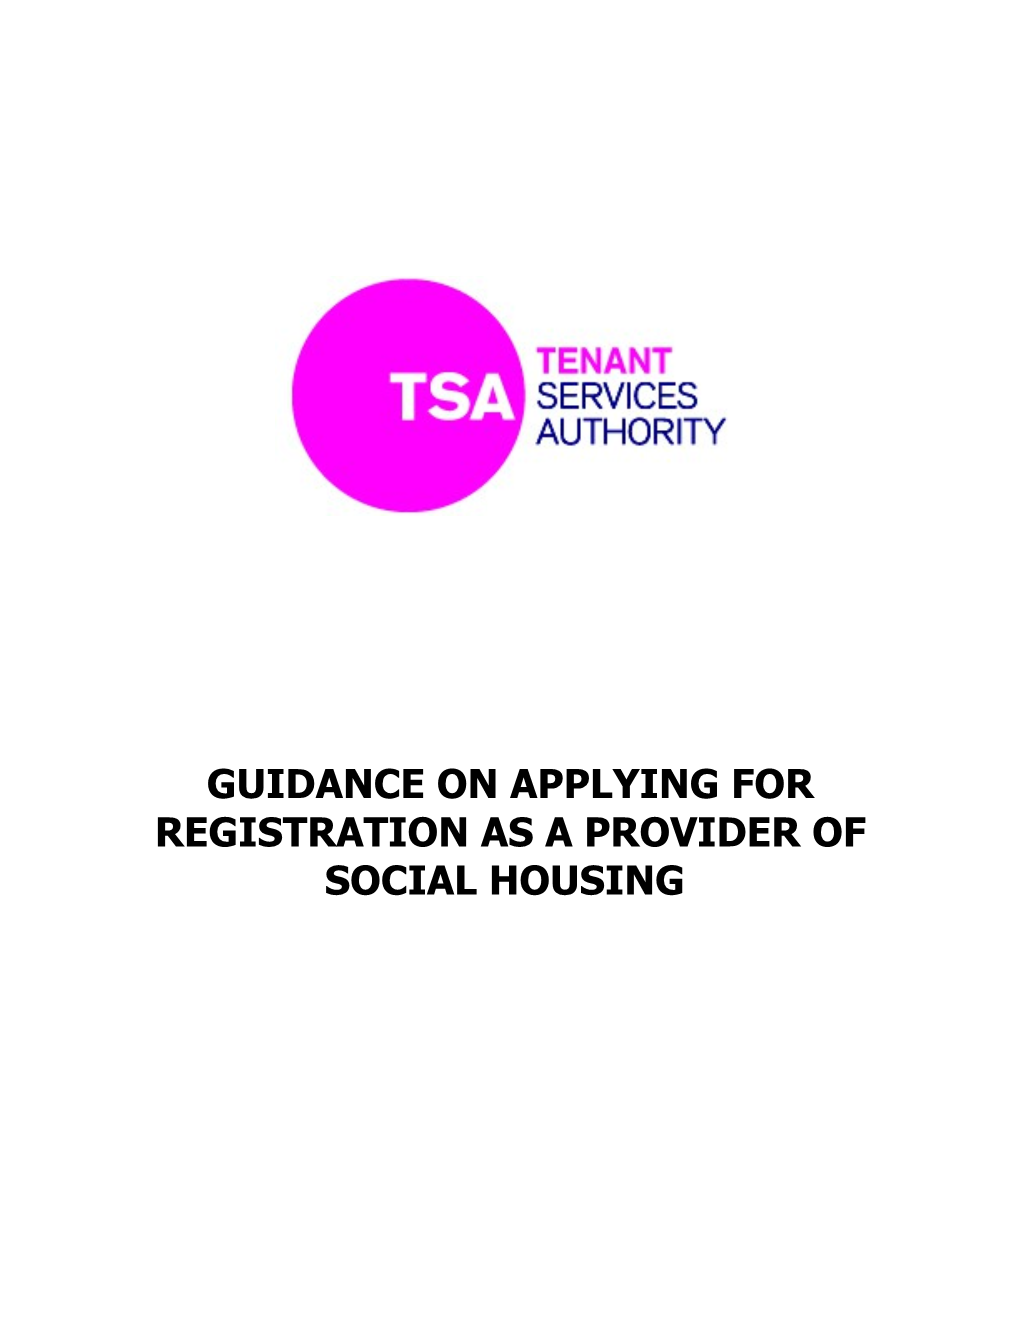 Guidance on Applying for Registration As a Provider of Social Housing